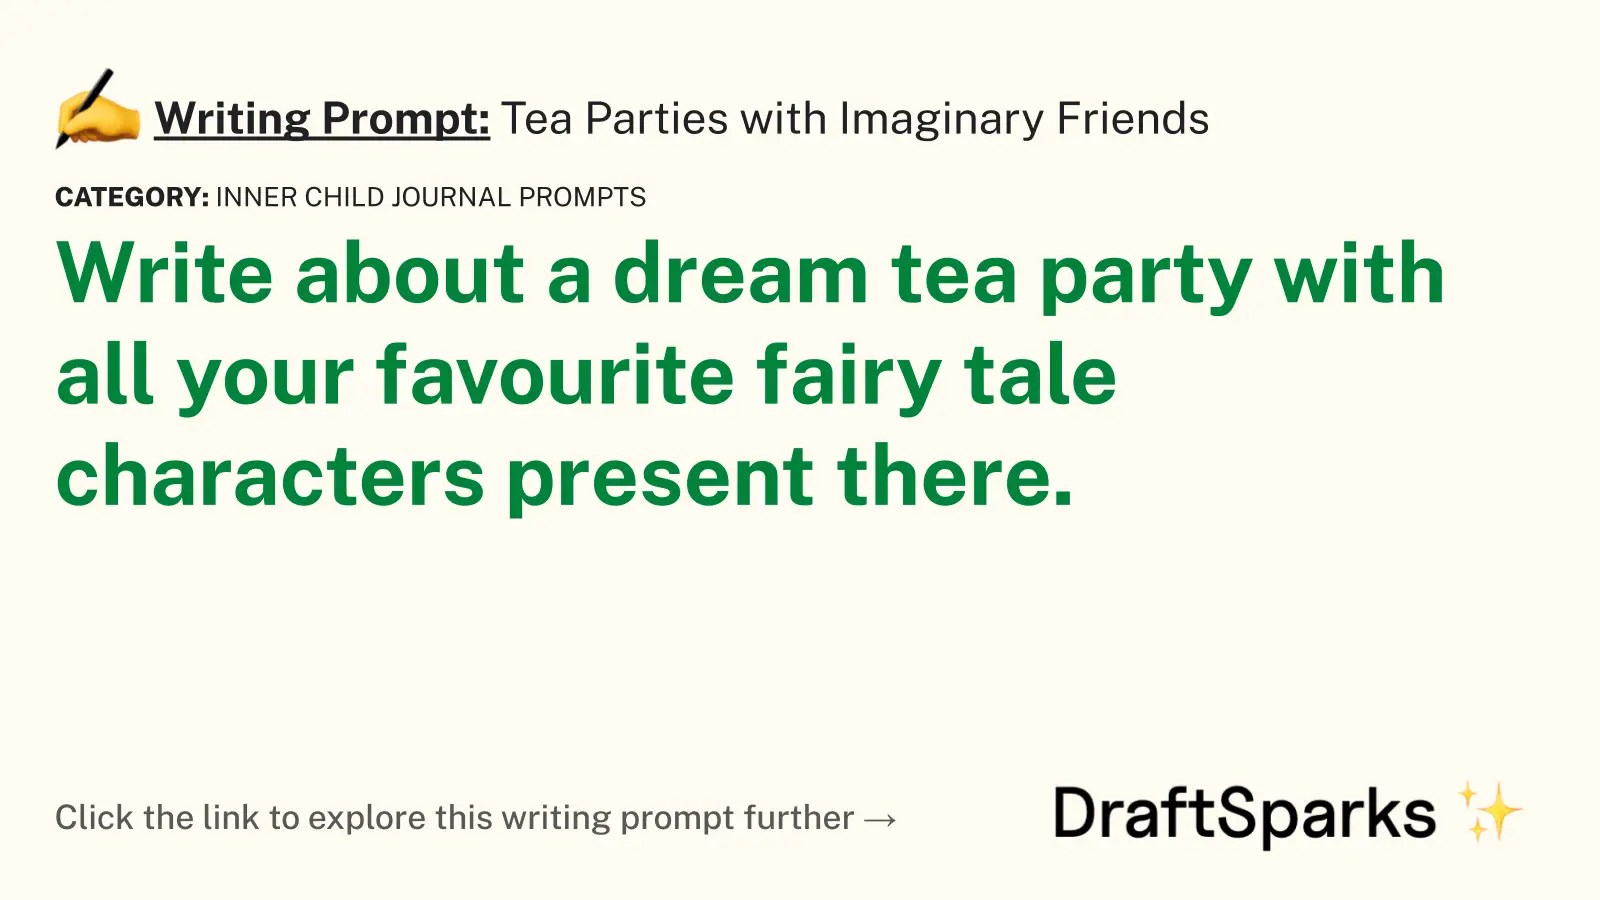 Tea Parties with Imaginary Friends